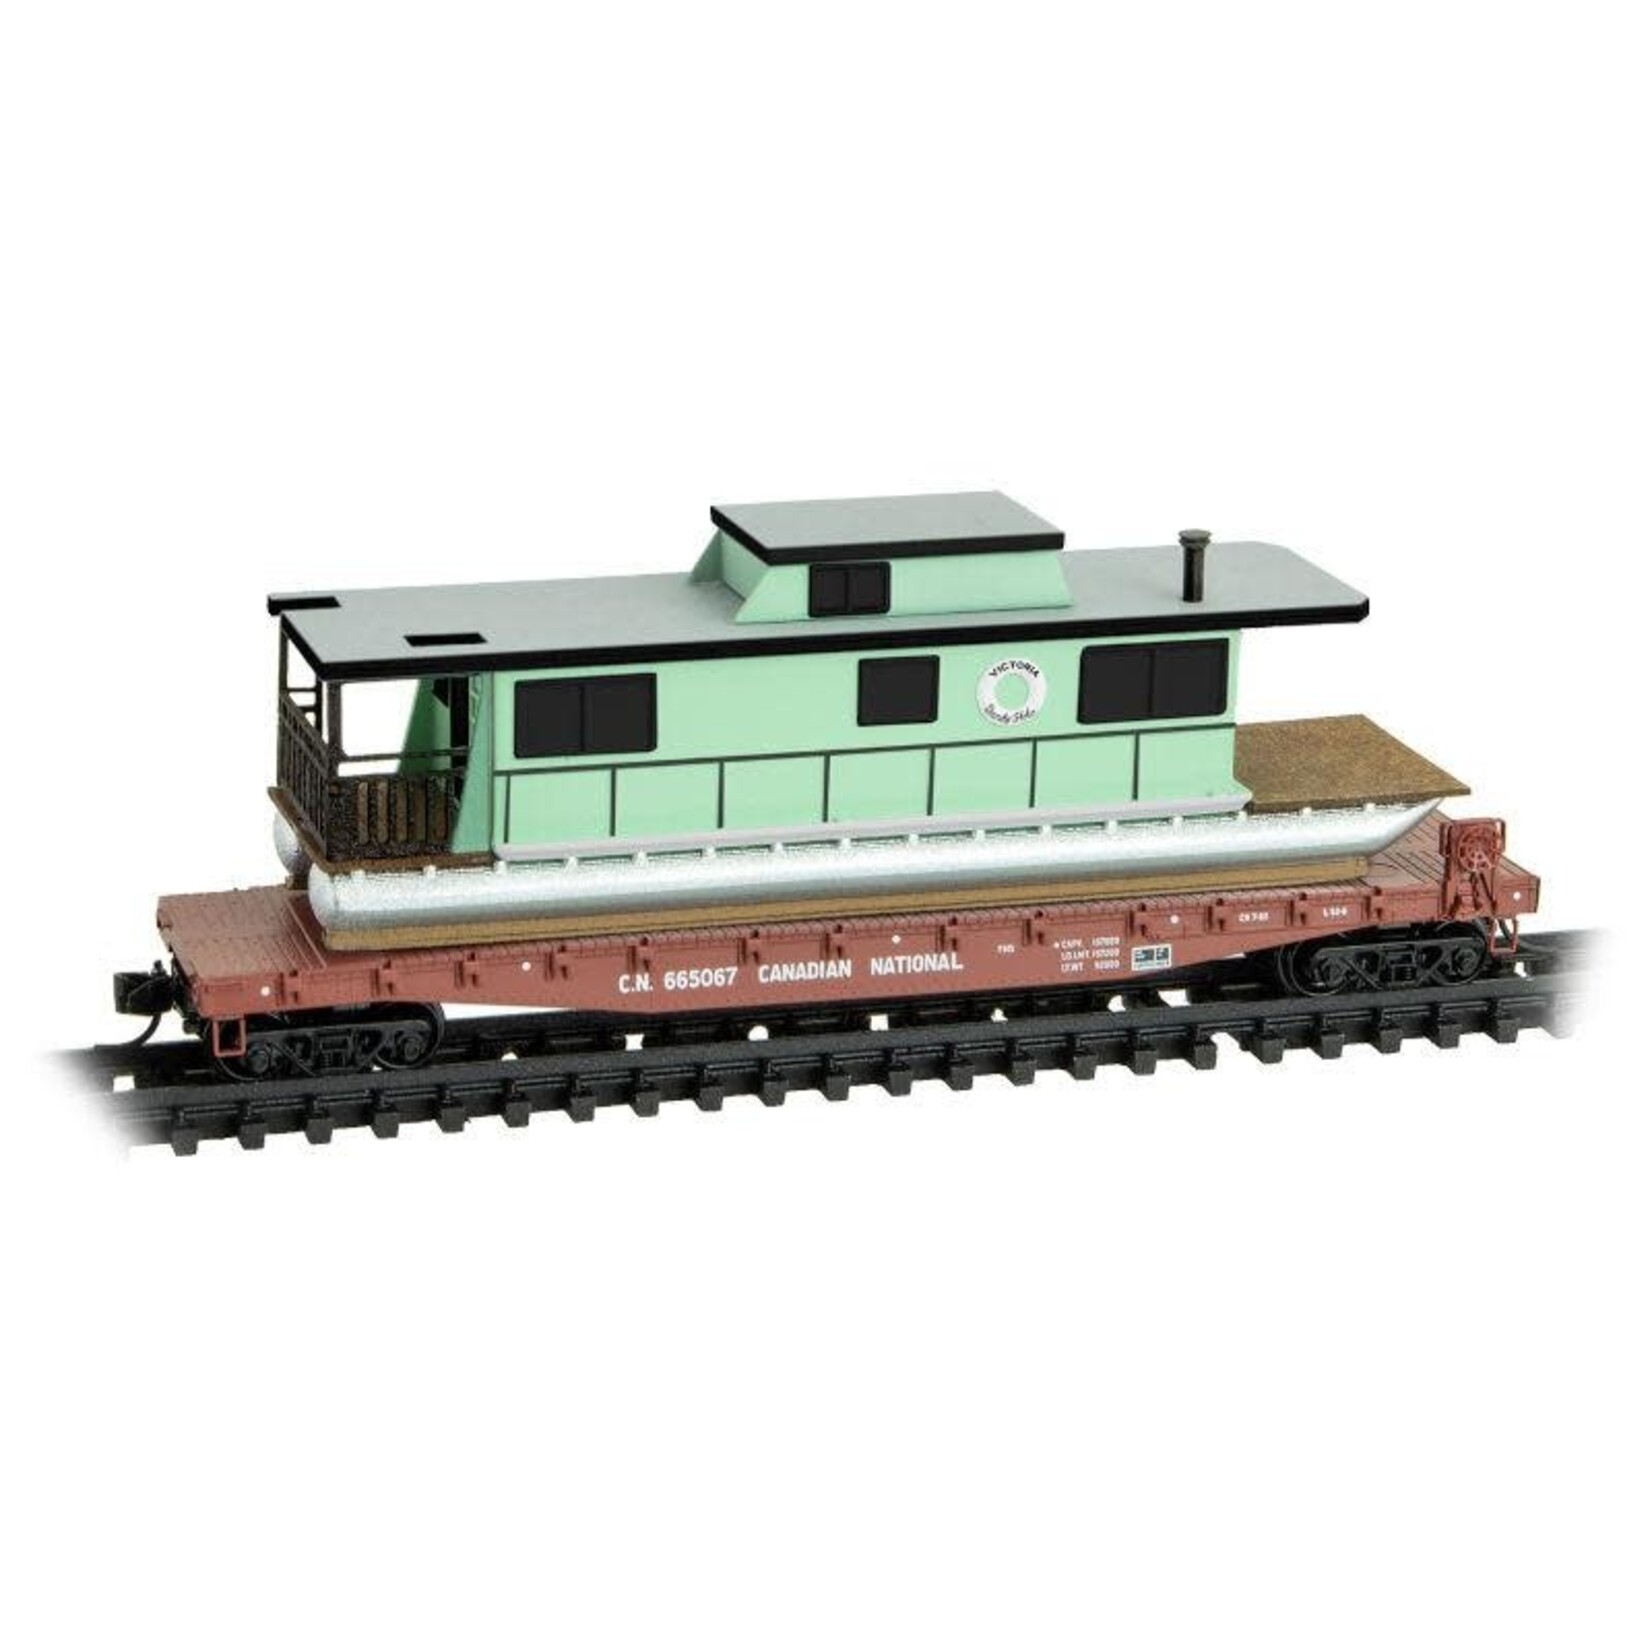 Micro Trains Line 04500323 Canadian National with House Boat Load Road Number 665607